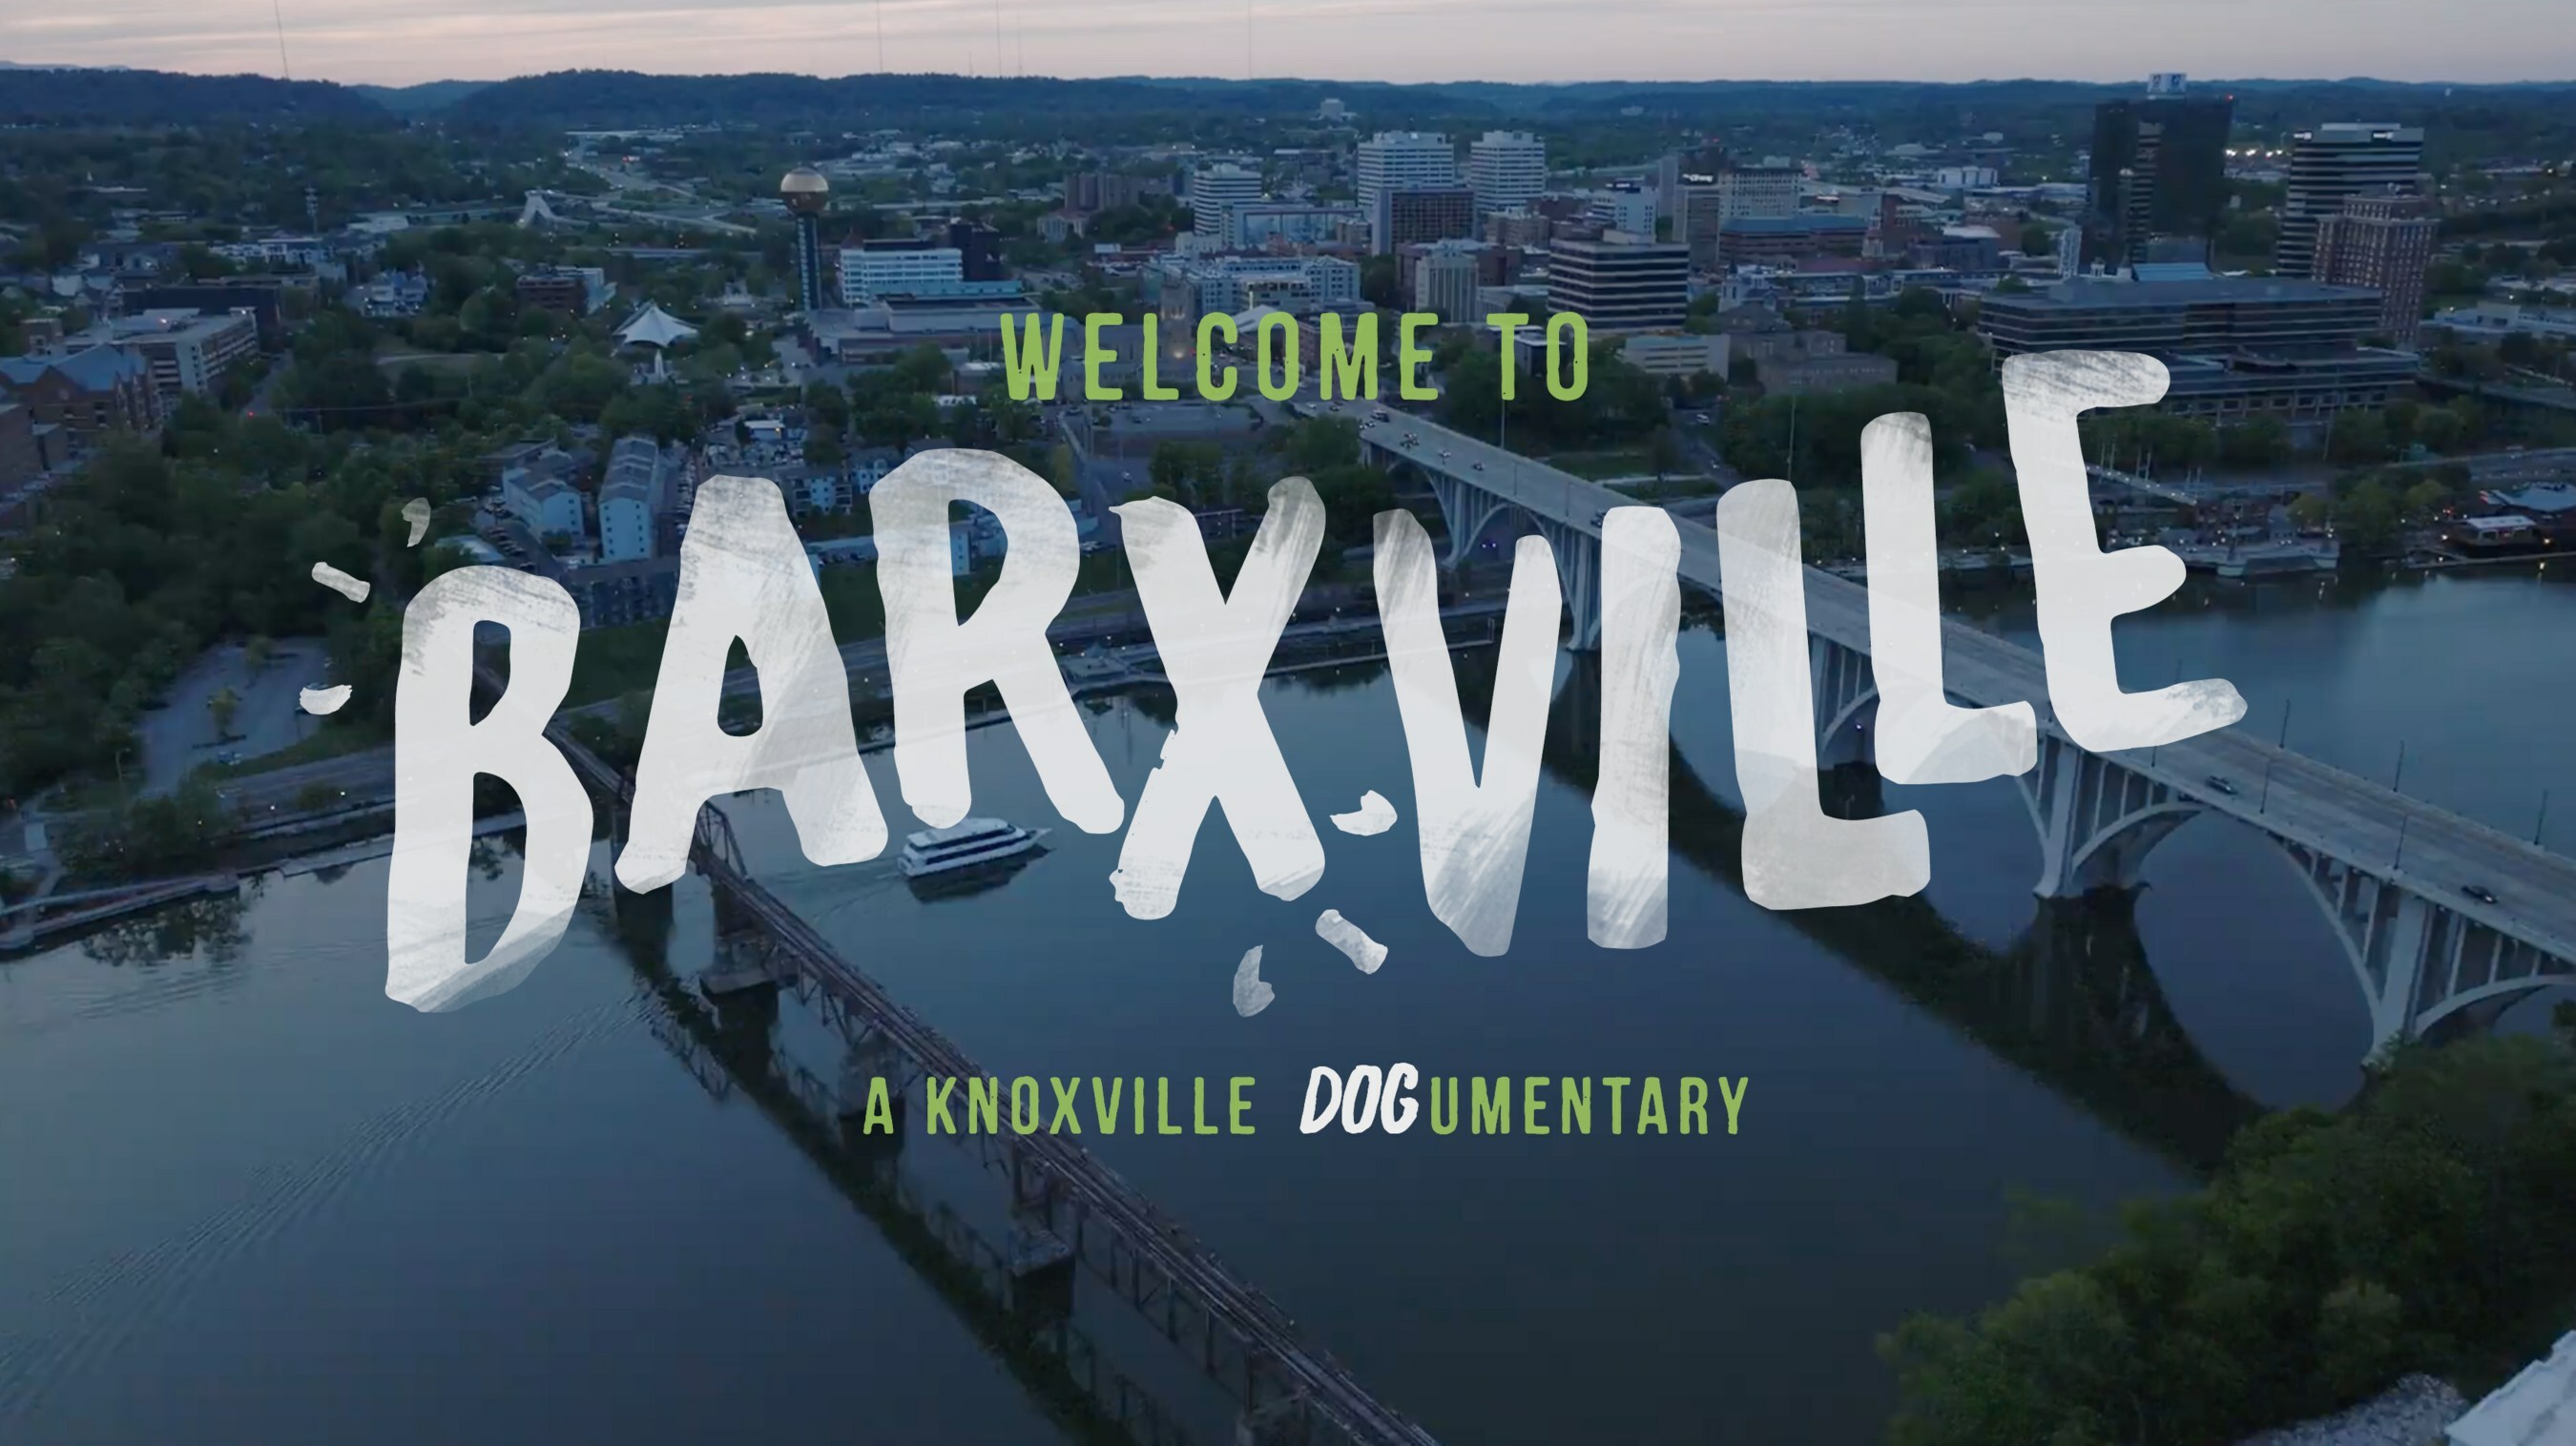 Welcome to Barxville, A Knoxville Dogumentary